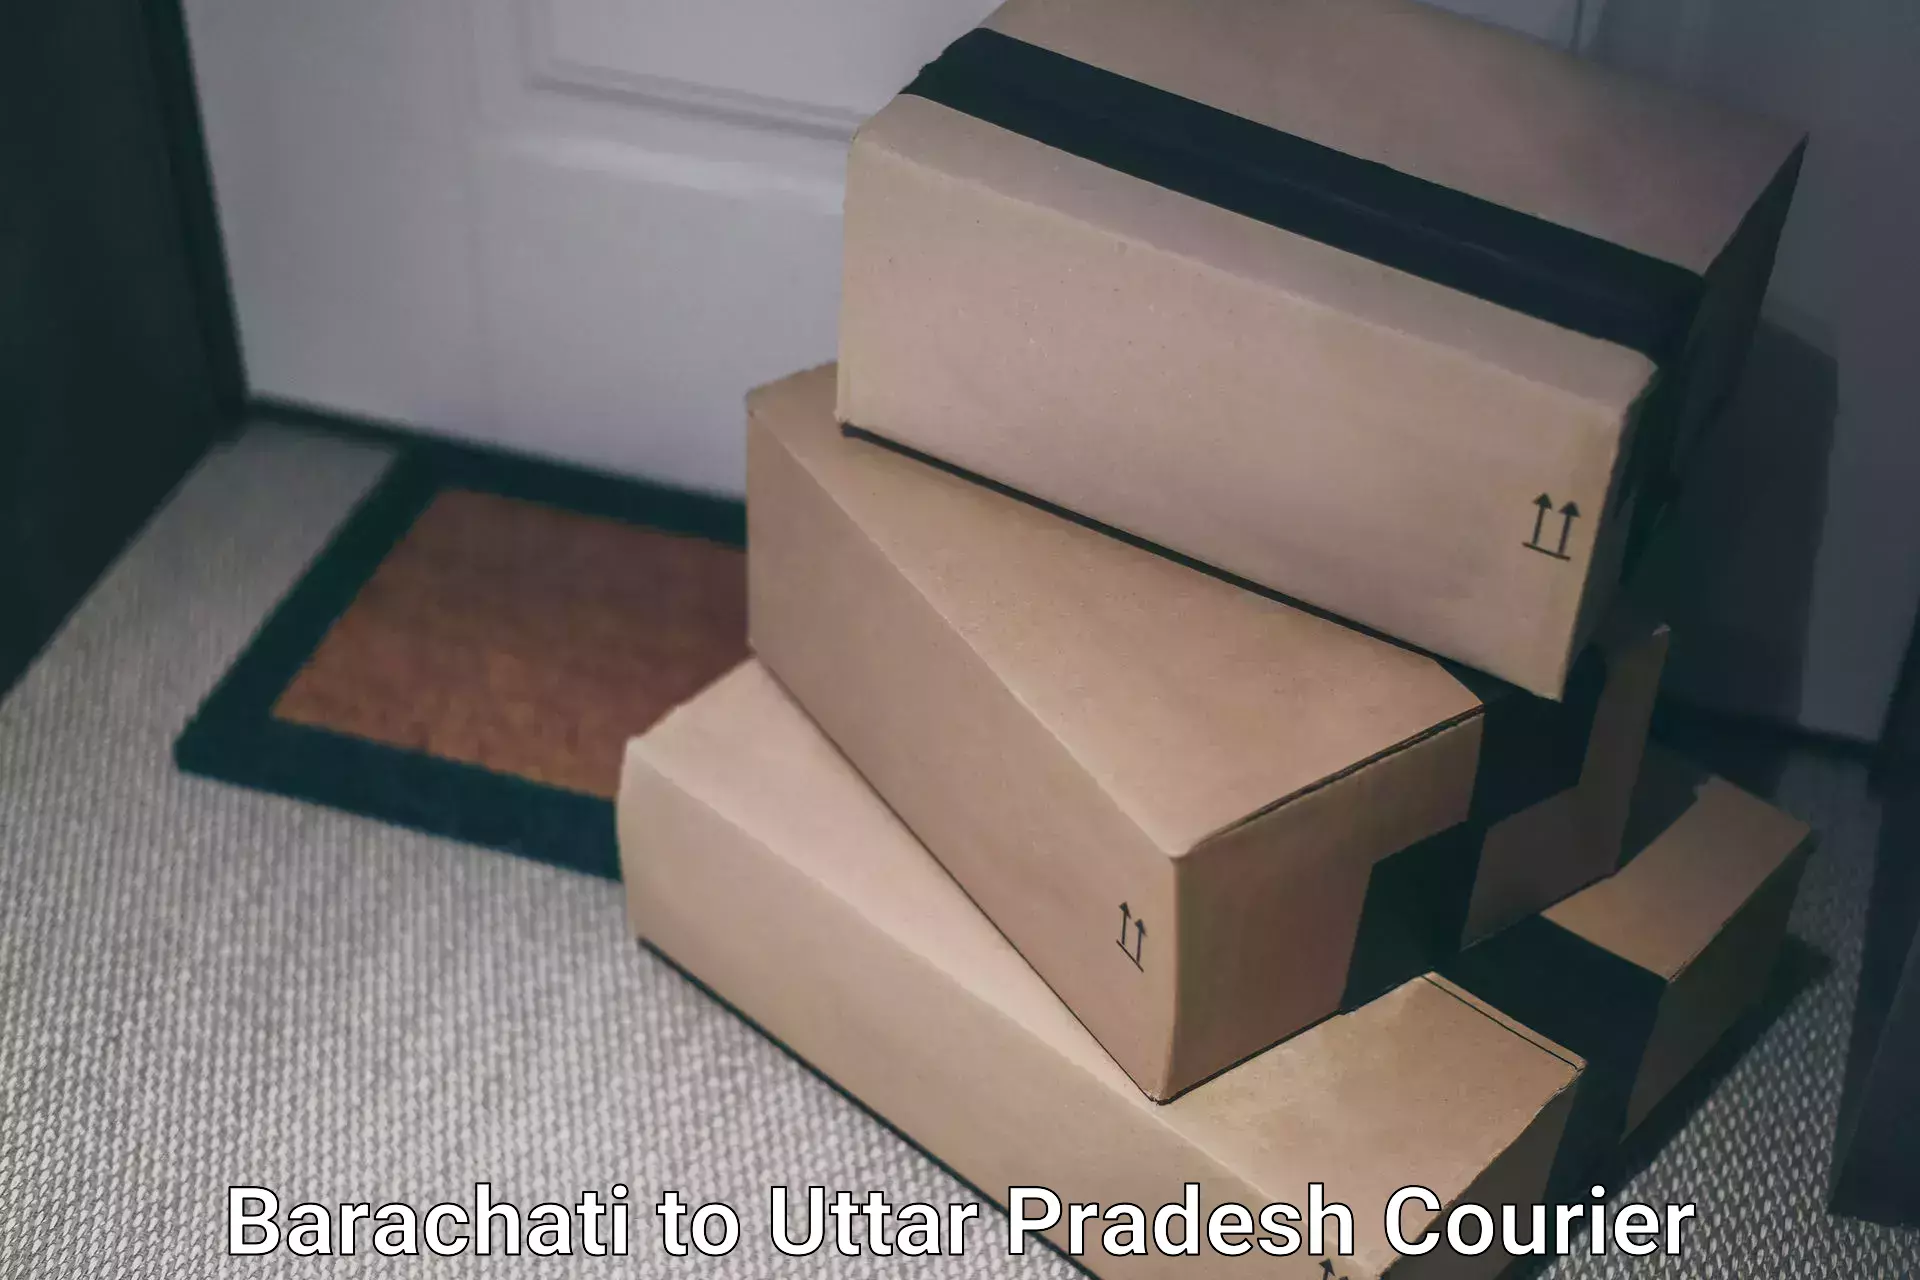 Reliable package handling Barachati to Allahabad